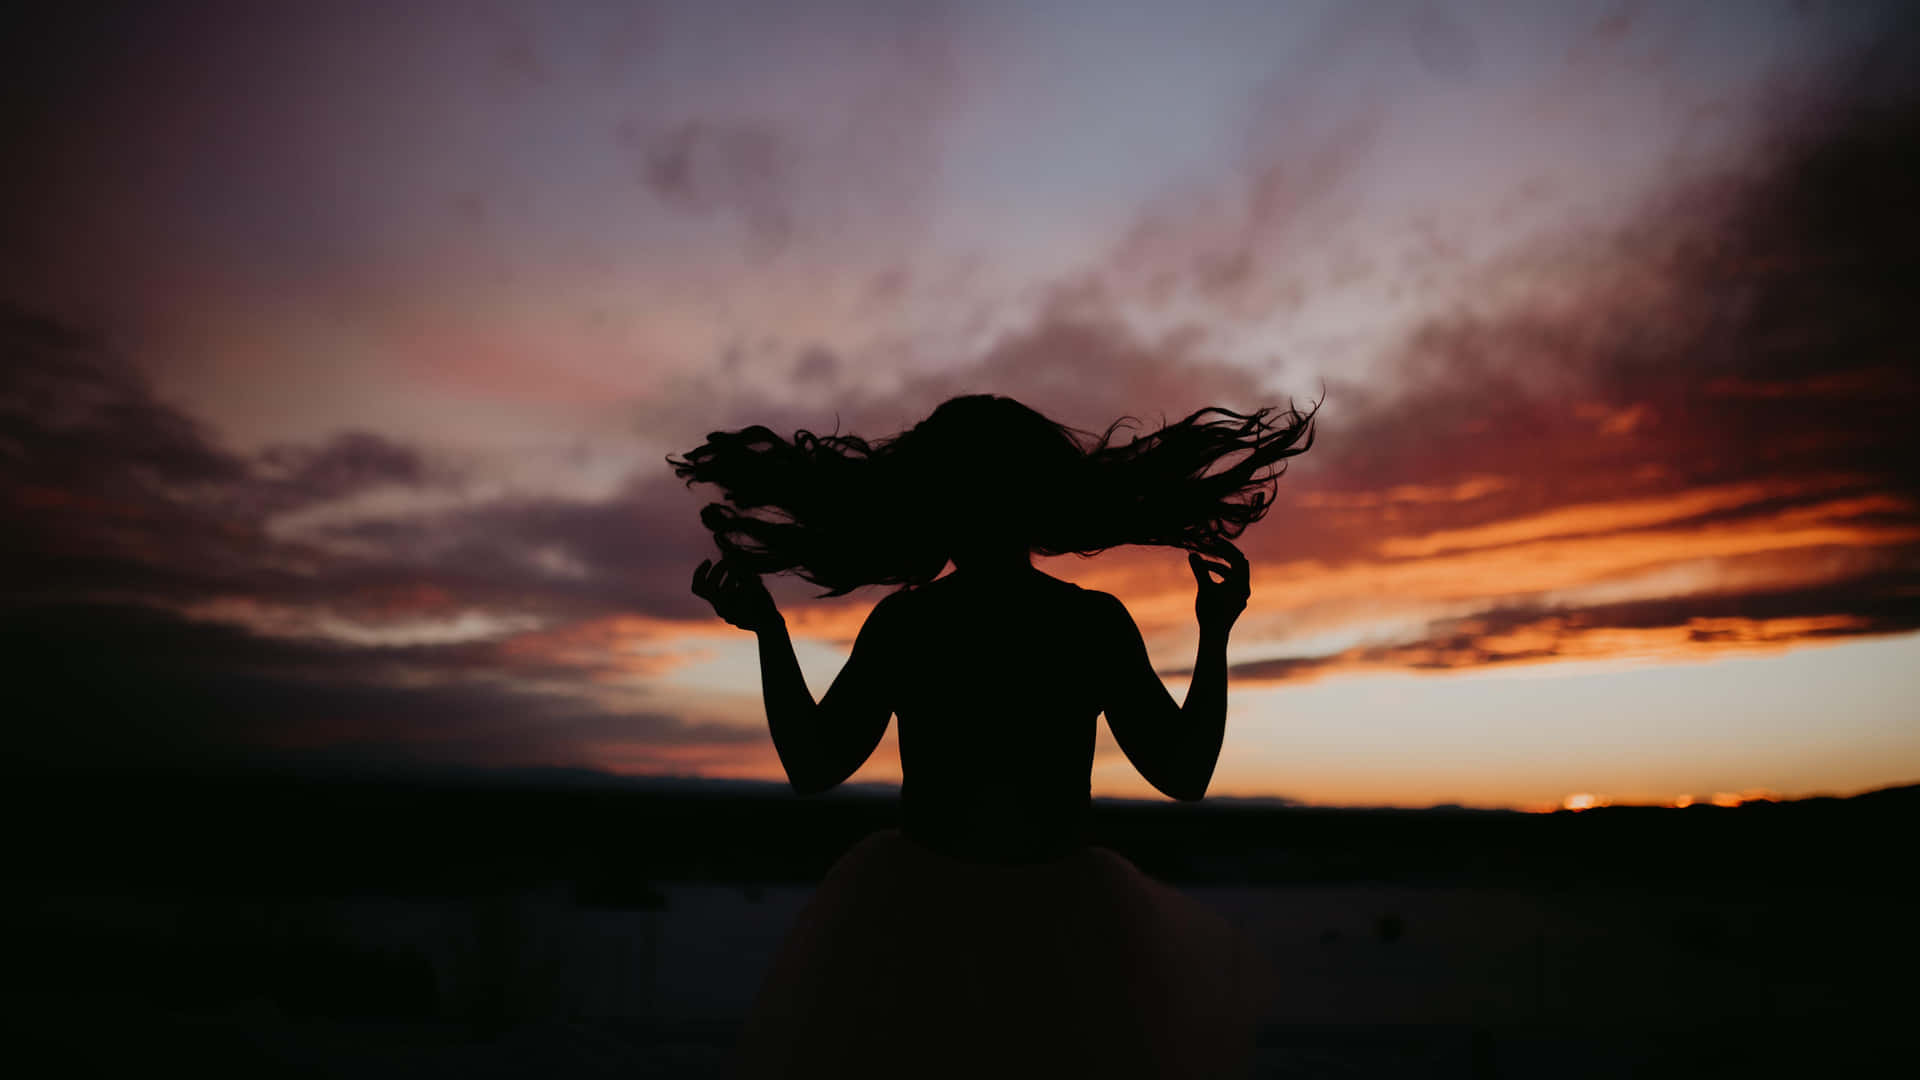 Sunset Silhouette: A Majestic View Wallpaper